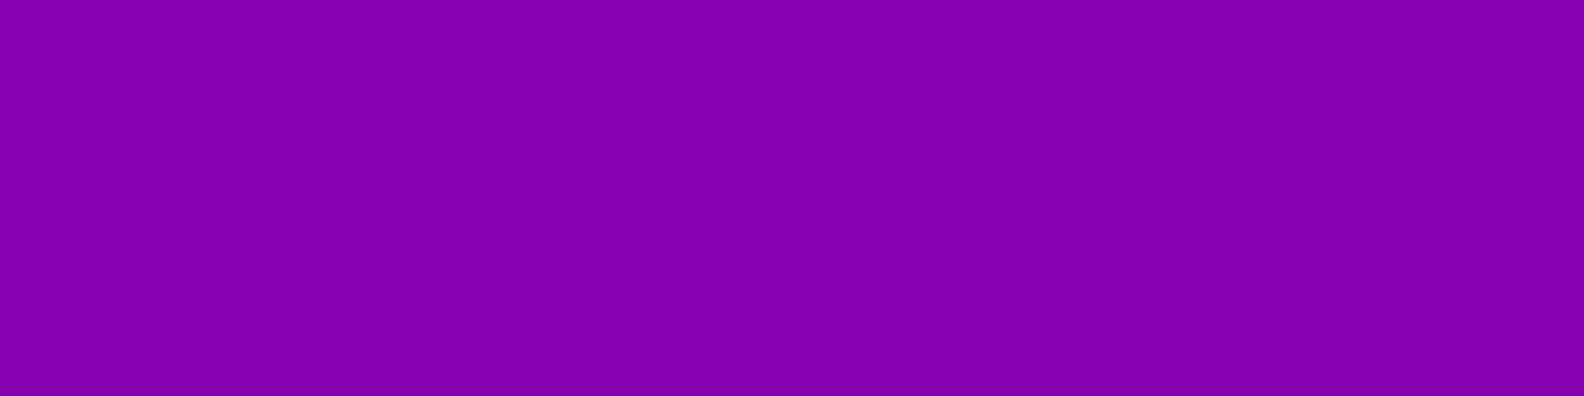 1584x396 Violet RYB Solid Color Background